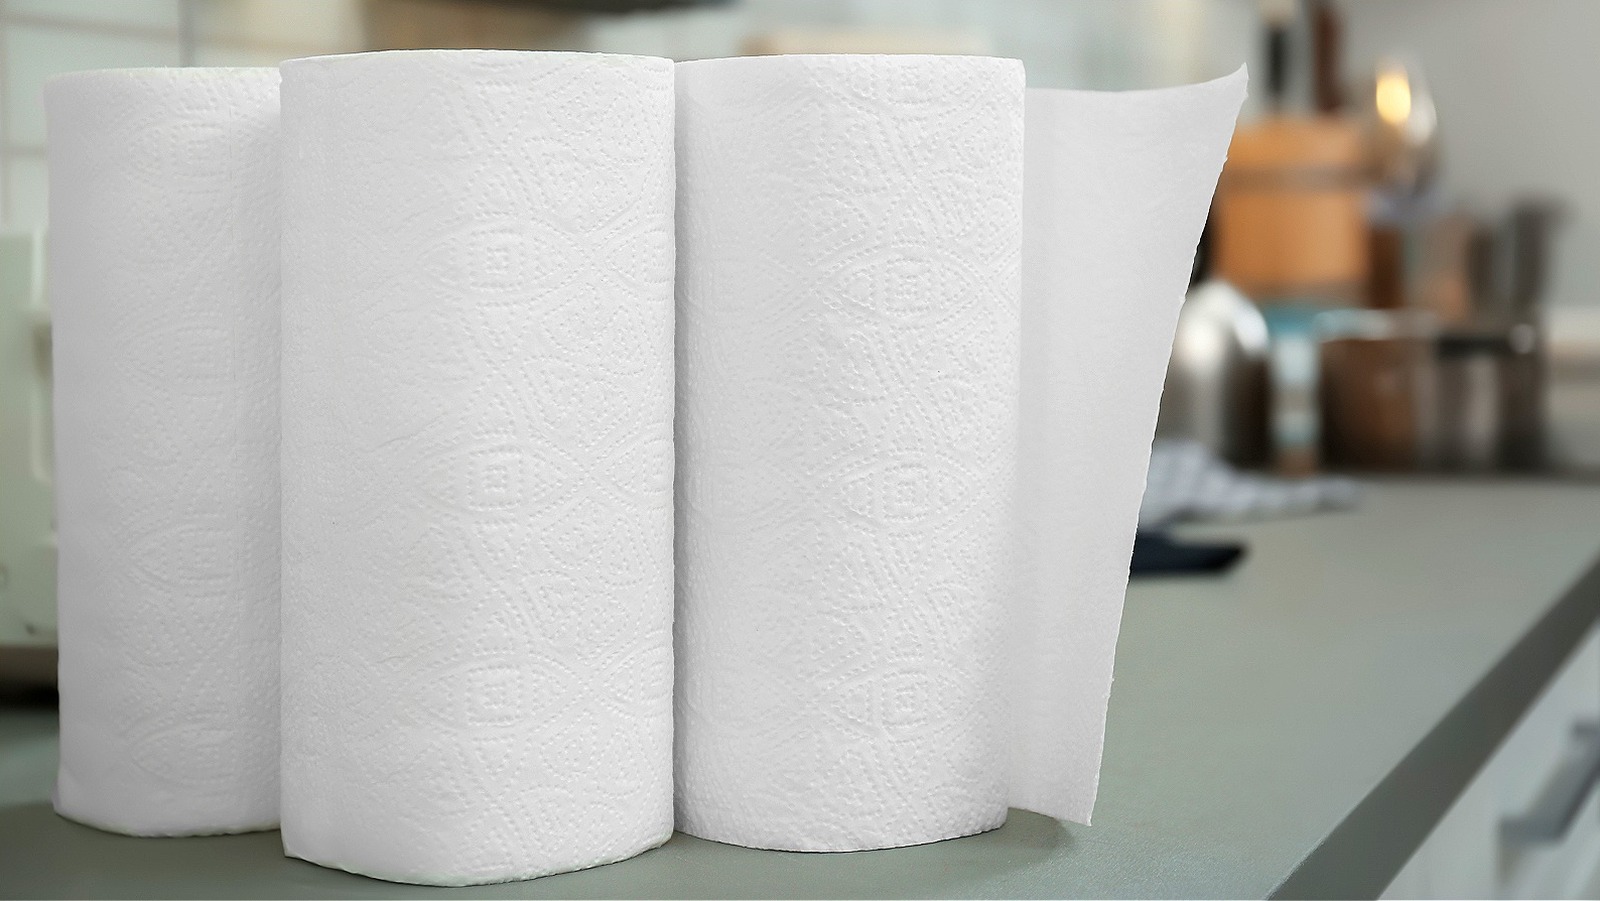 The Easy Step To Using Fewer Paper Towels In Your Home